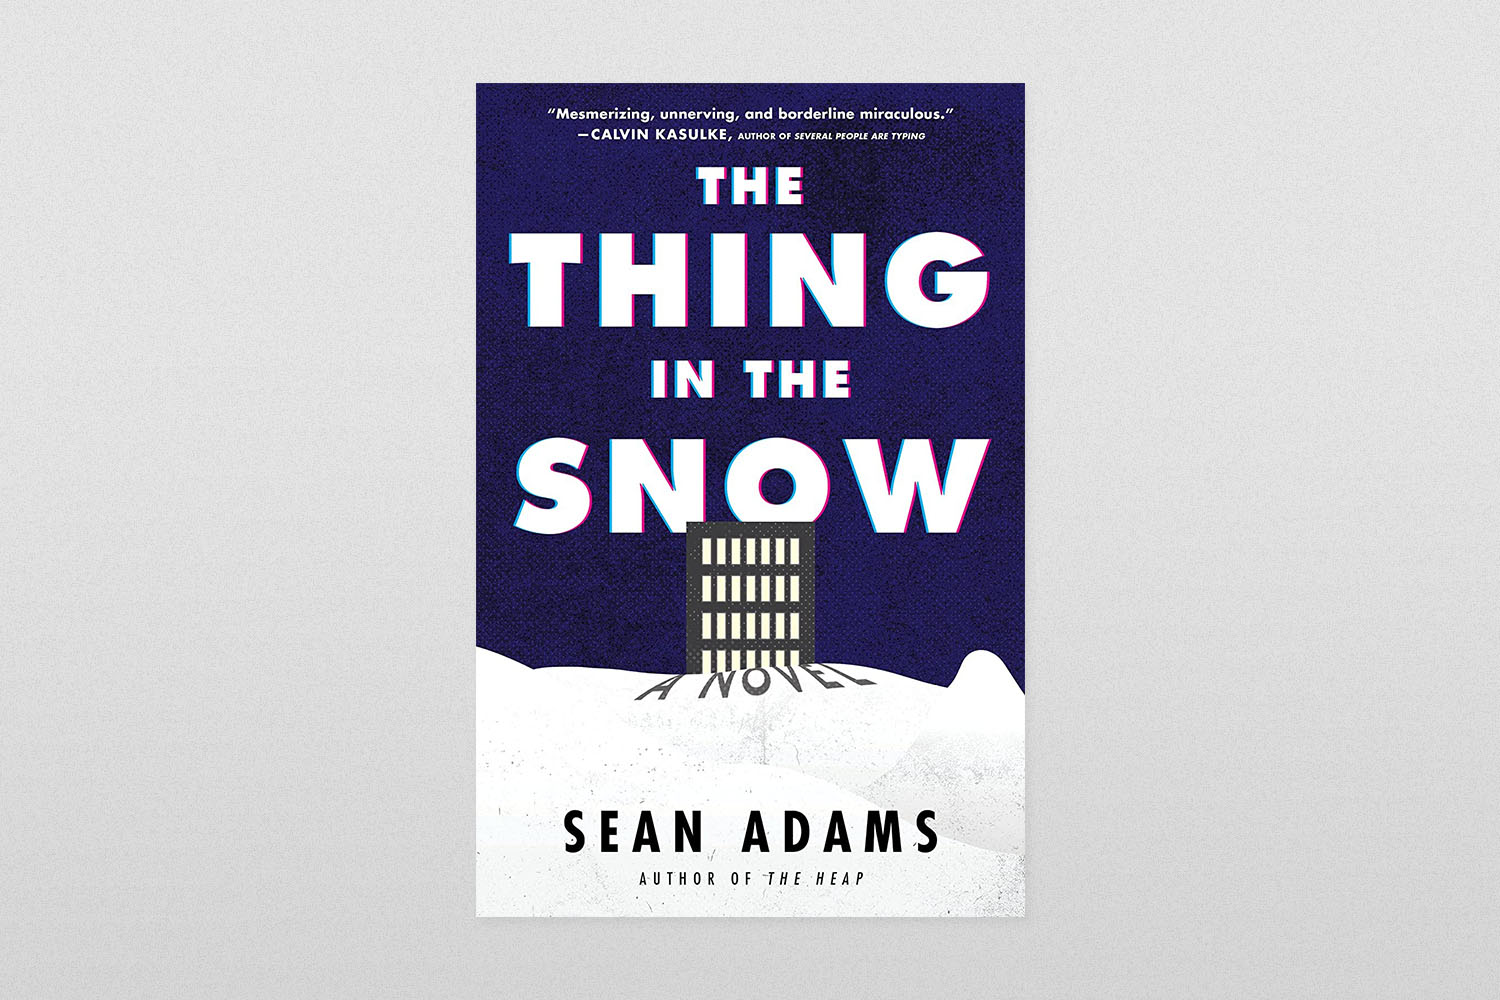 The Thing in the Snow, Sean Adams